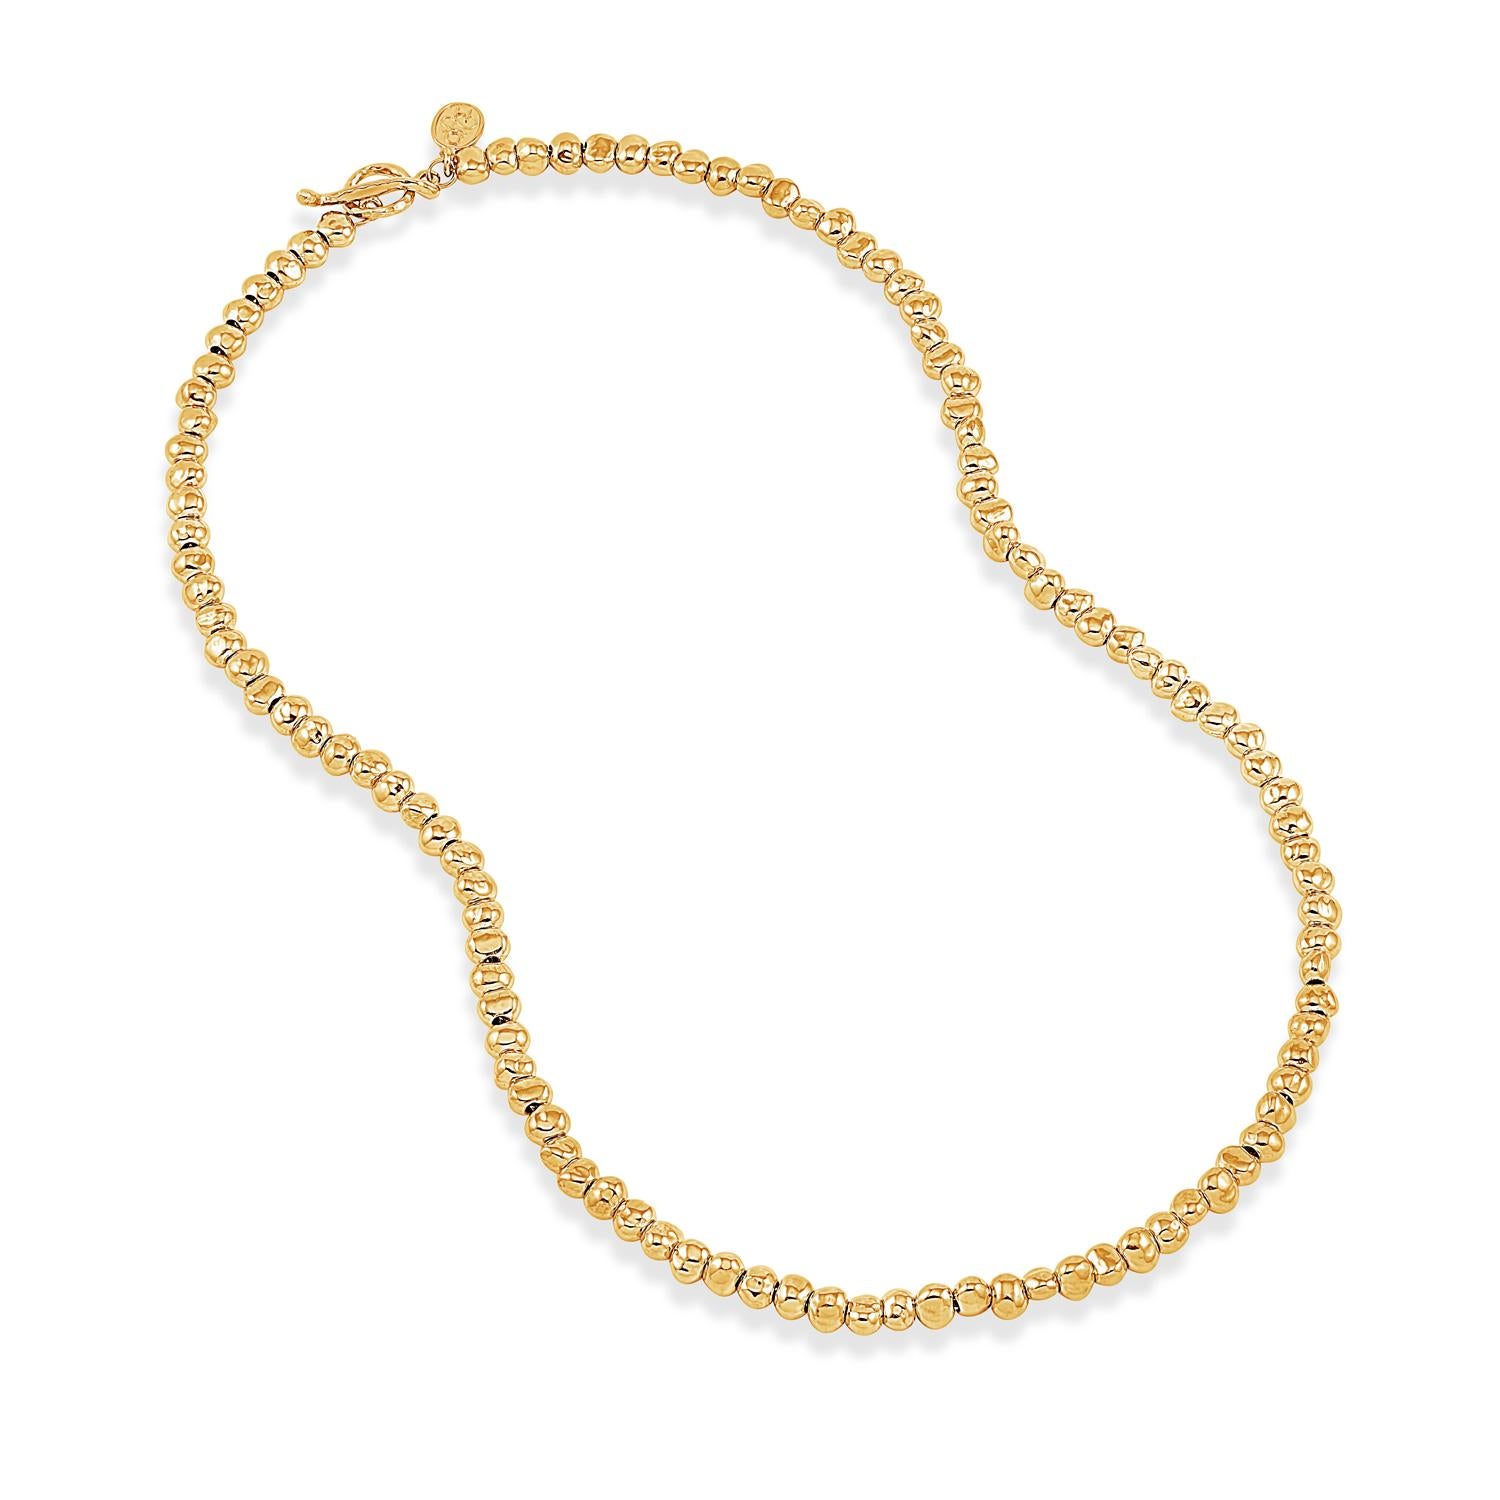 18ct yellow gold vermeil on a sterling silver necklace made of medium beaten nugget shaped beads threaded onto chain. The necklace is finished with our signature heart and t-bar clasp. A timeless classic.
Taking inspiration from various sources